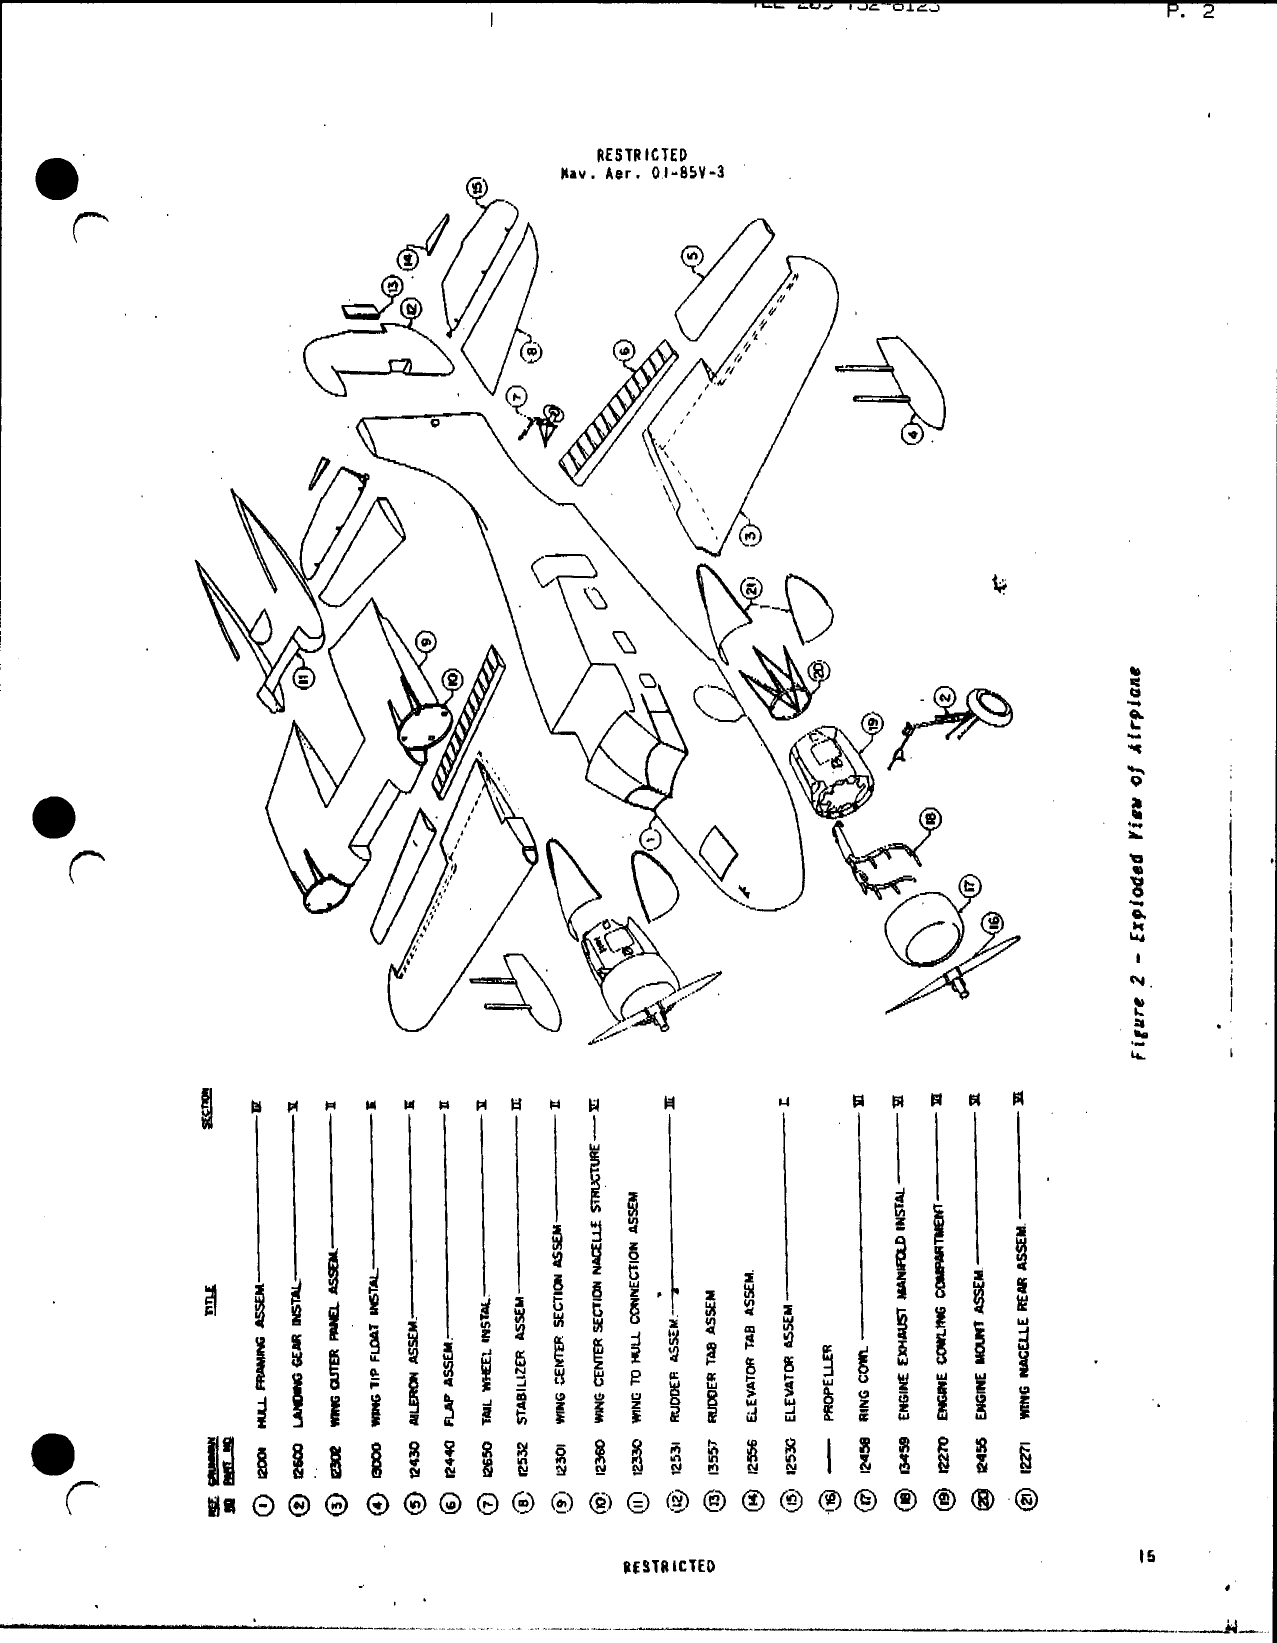 Sample page  22 from AirCorps Library document: Structural Repair - Grumman Goose - JRF-1, JRF-2, JRF-3, JRF-4, JRF-5, JRF-6B